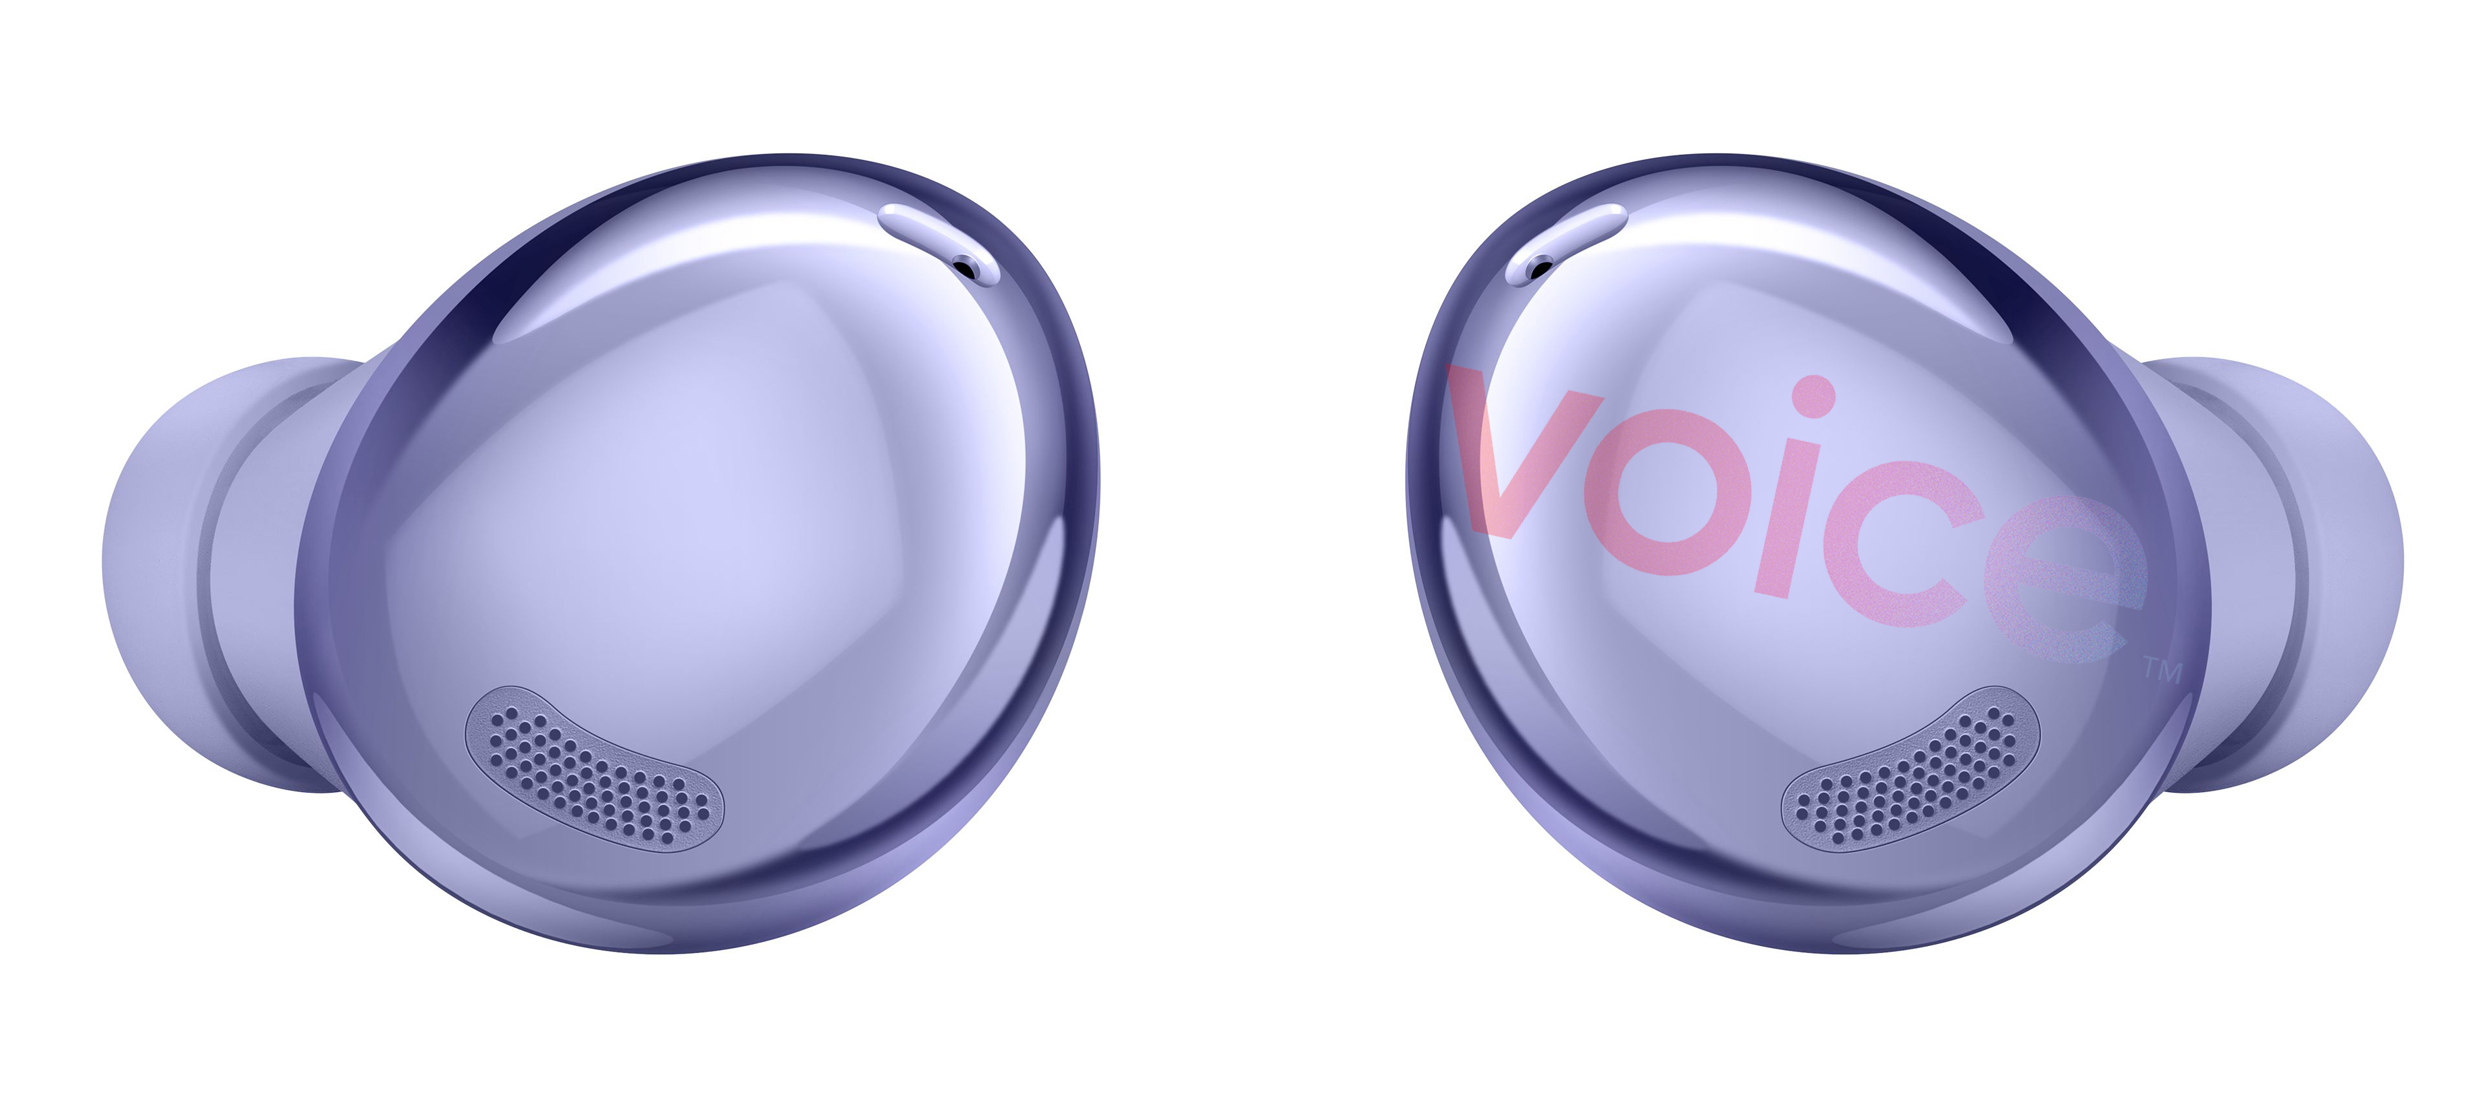 Samsung Galaxy Buds Pro details and images leak suggesting ANC in an in-ear design